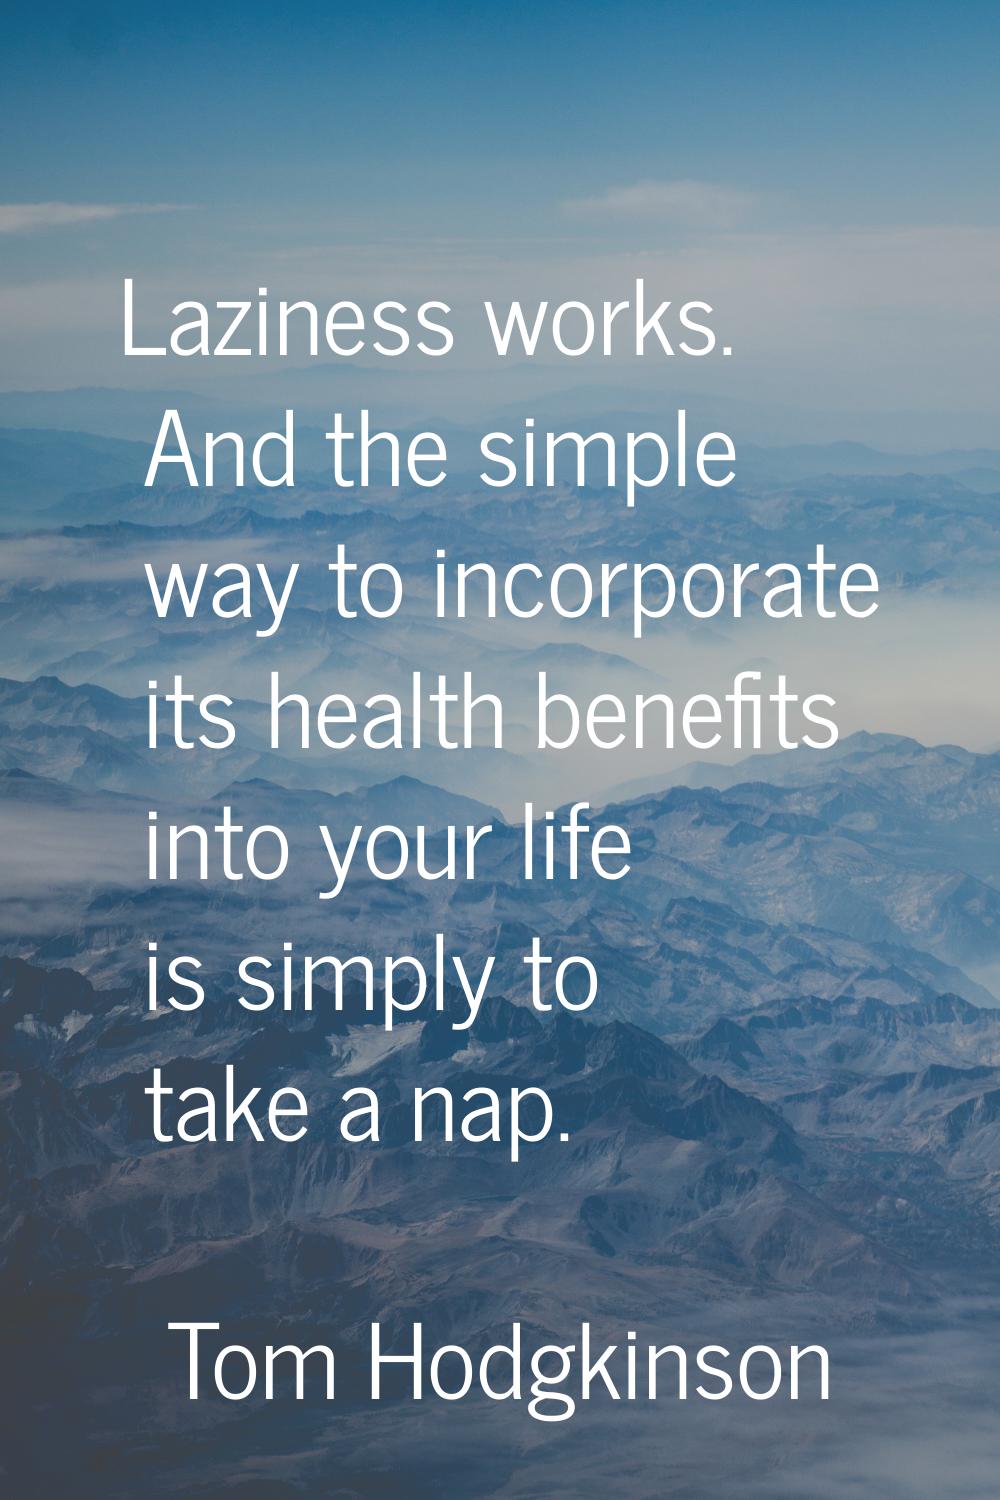 Laziness works. And the simple way to incorporate its health benefits into your life is simply to t